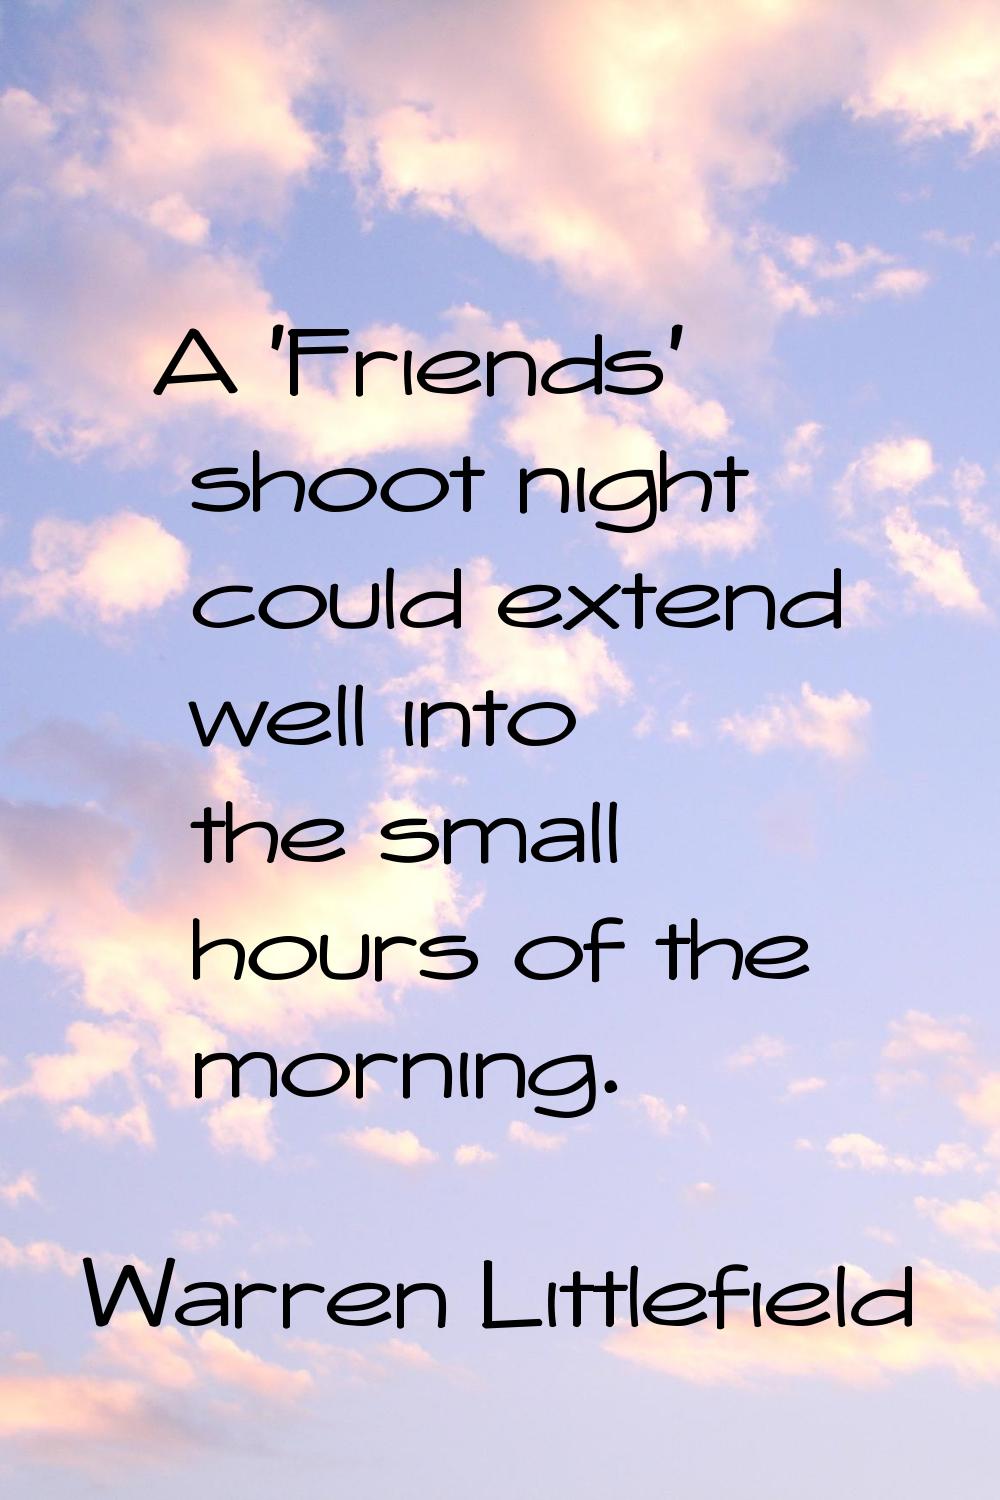 A 'Friends' shoot night could extend well into the small hours of the morning.